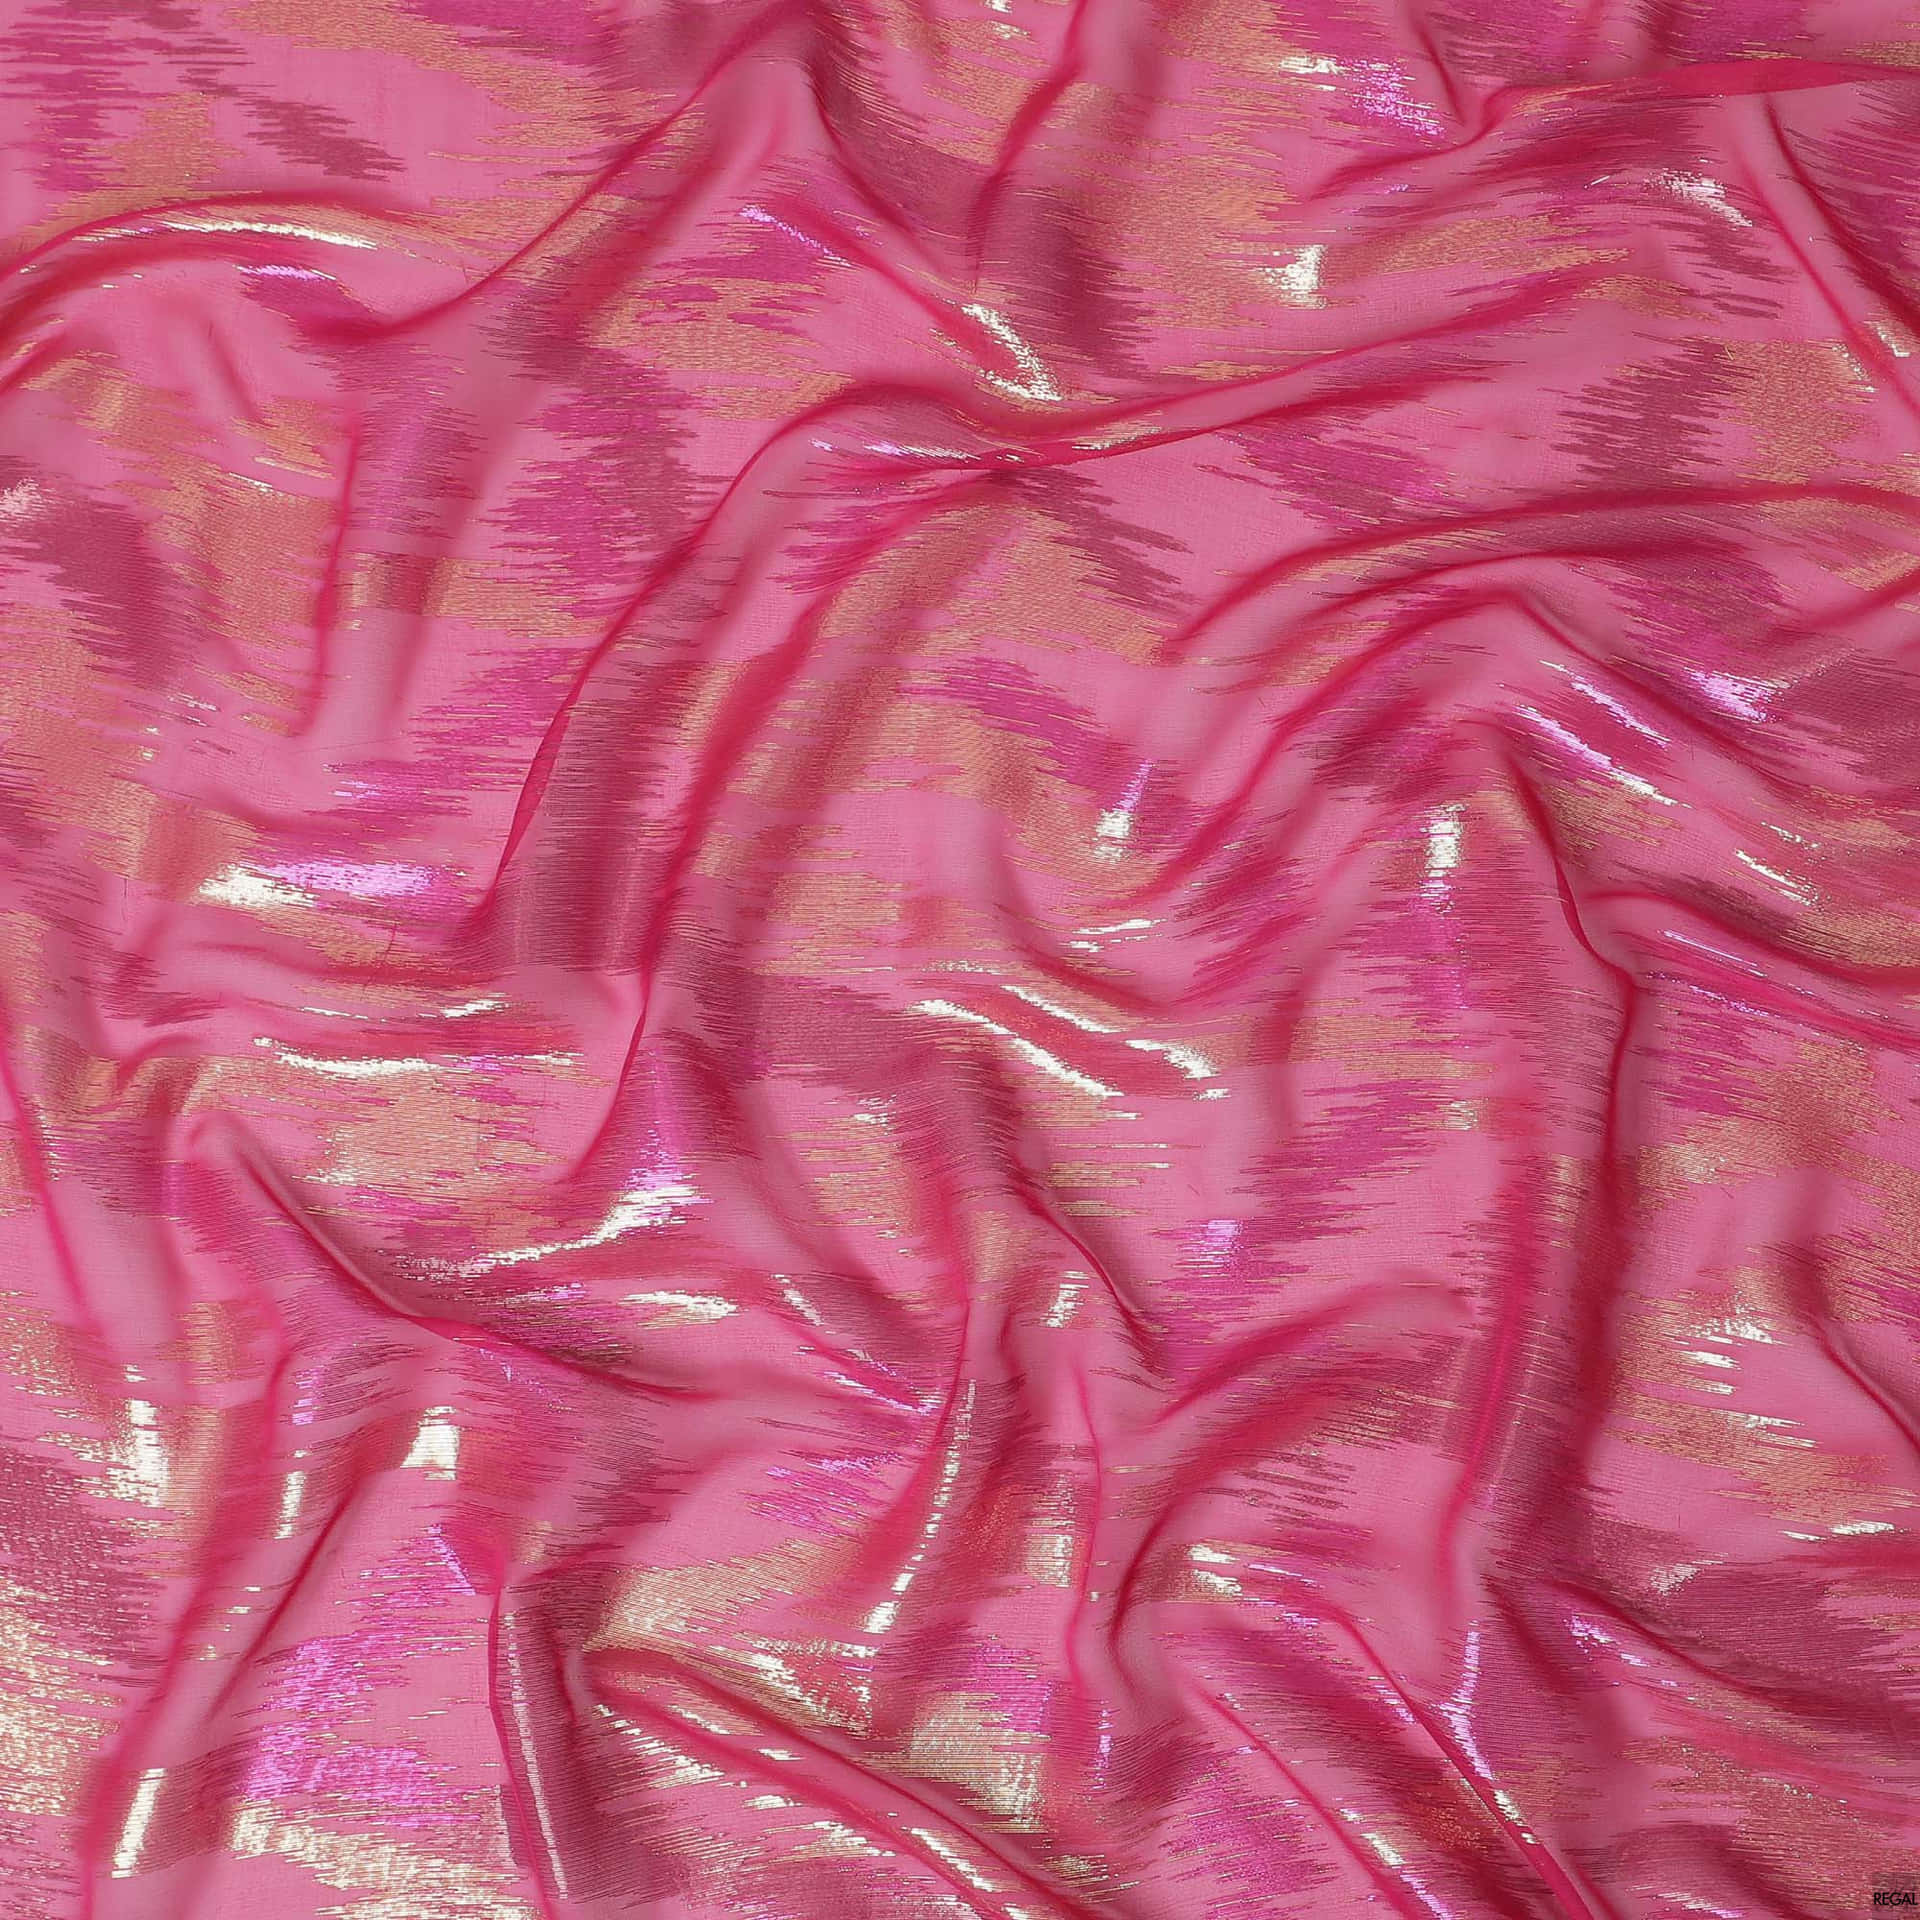 A Pink And Gold Fabric With Shiny Texture Wallpaper